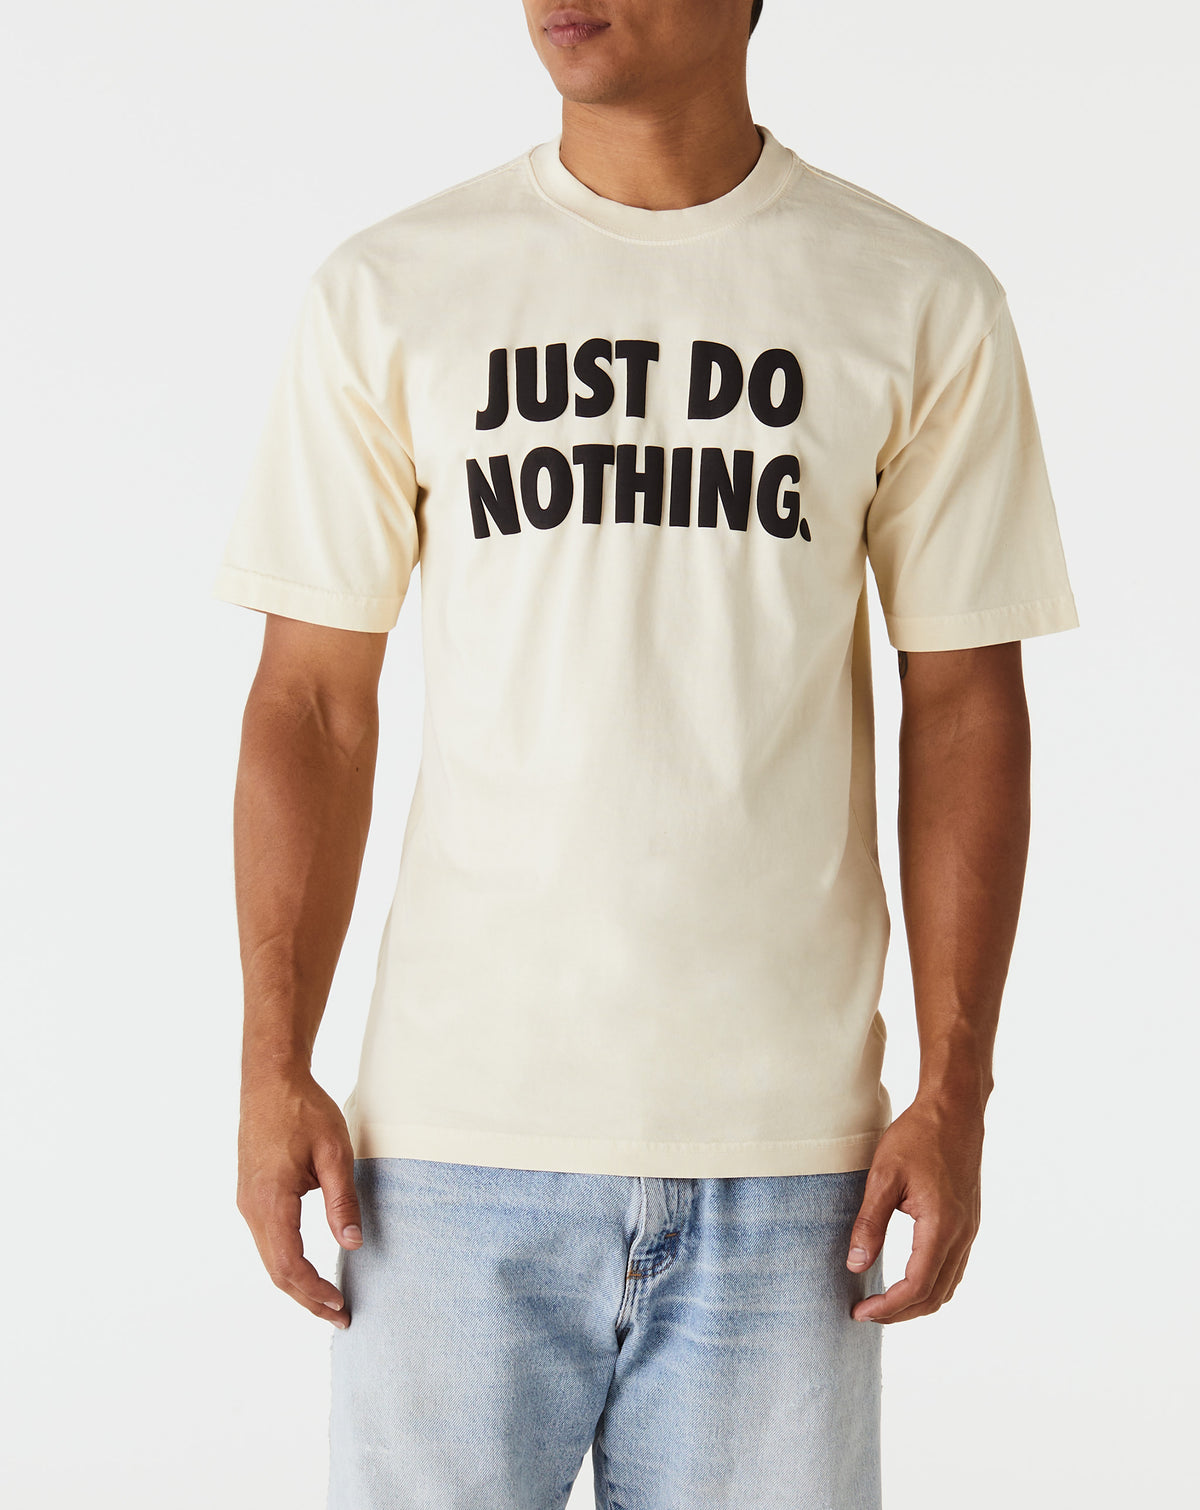 Market Just Do Nothing T-Shirt - Rule of Next Apparel